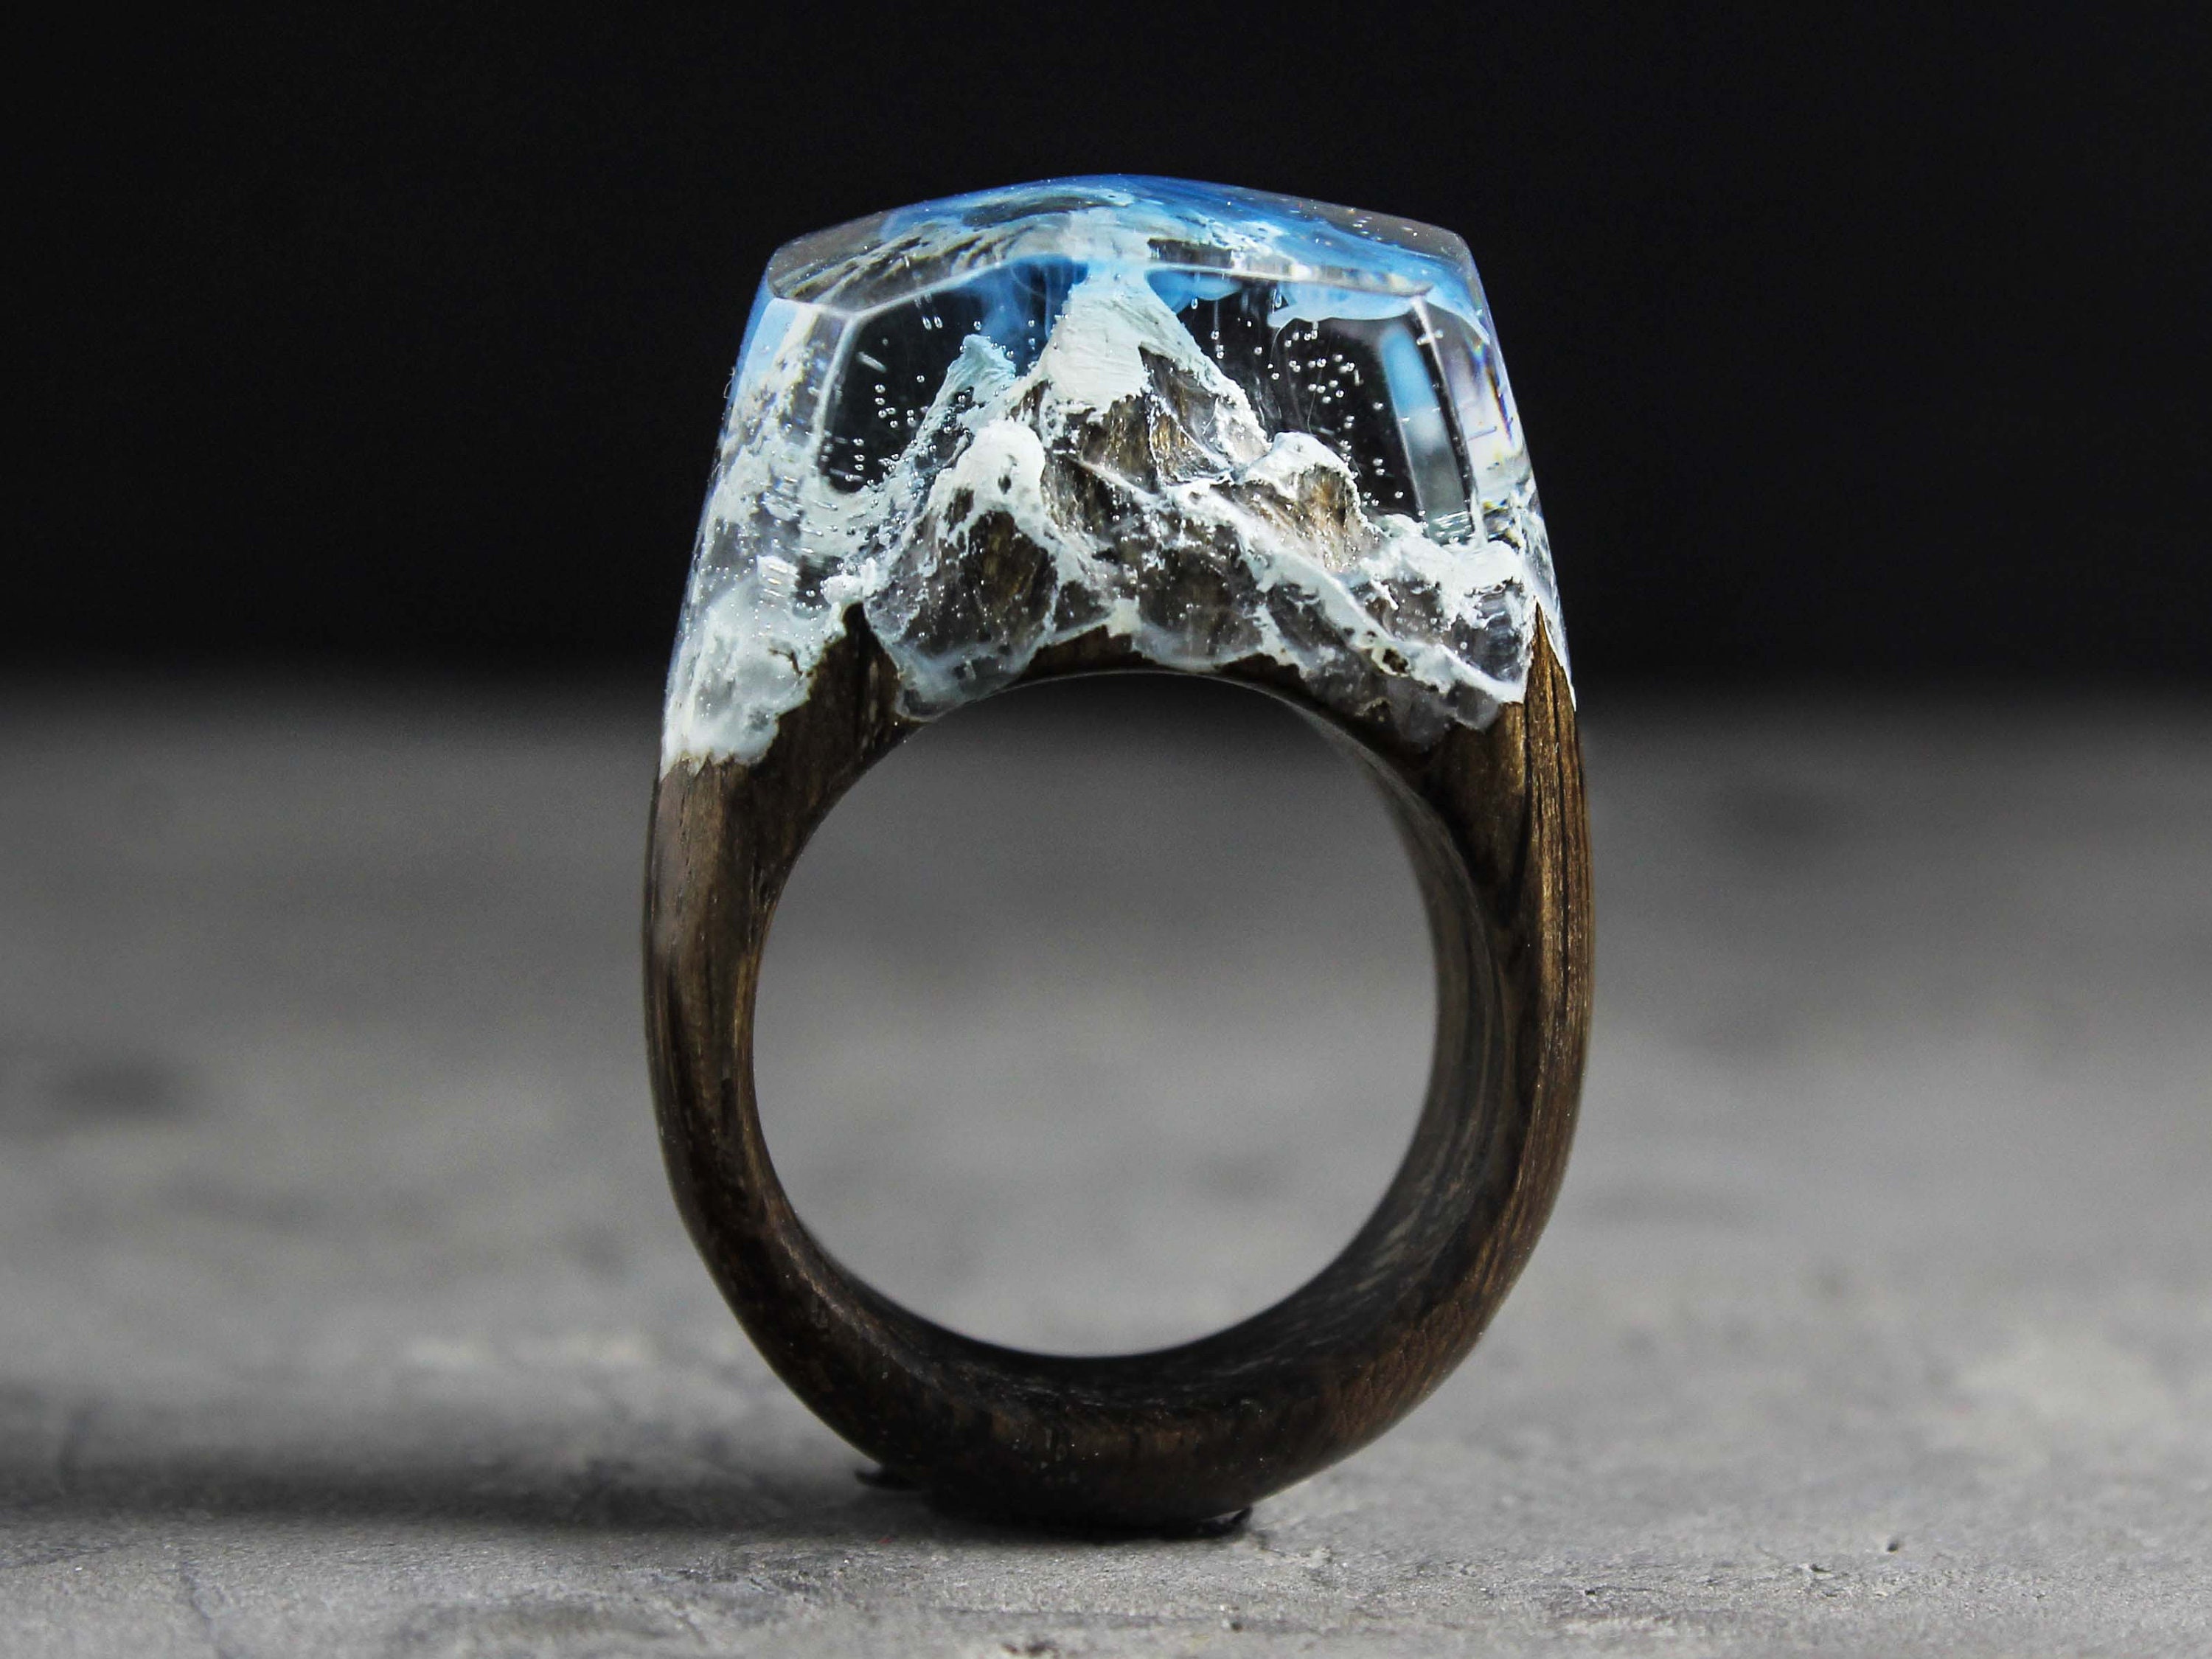 NDJEWELRY Resin Ring Wood Band Romantic Forest Secret World Mountain  Landscape insided Statement Ring Unique Handmade Gift for Her Size 6.5